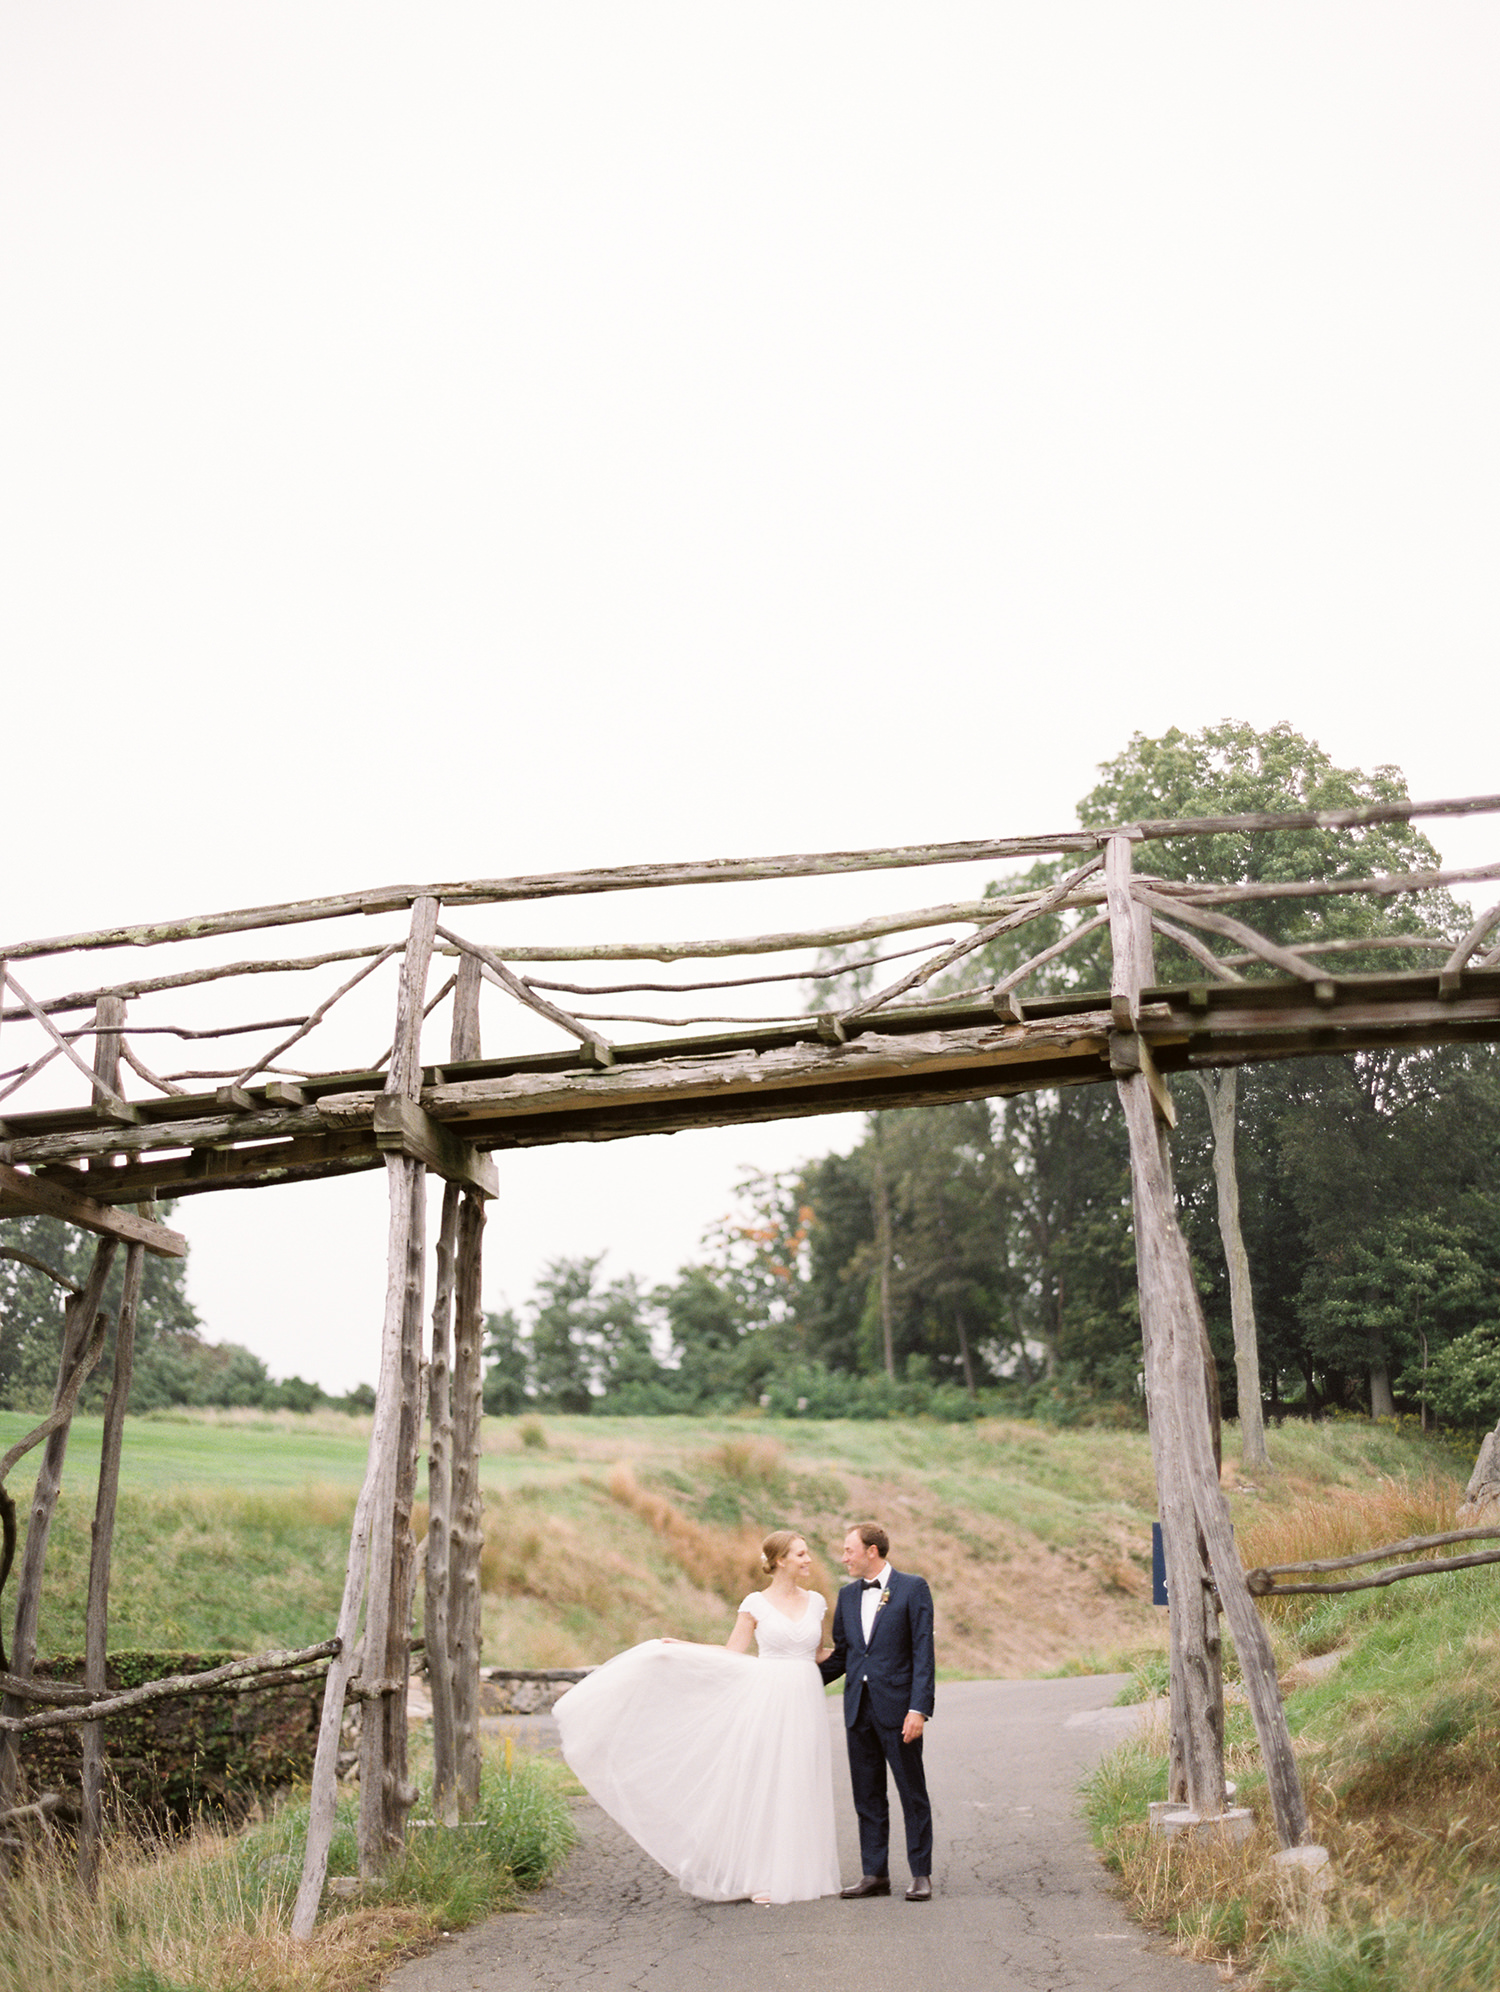 Sleepy Hollow Country Club Wedding on Golf Course with Wooden Bridge Mary Dougherty